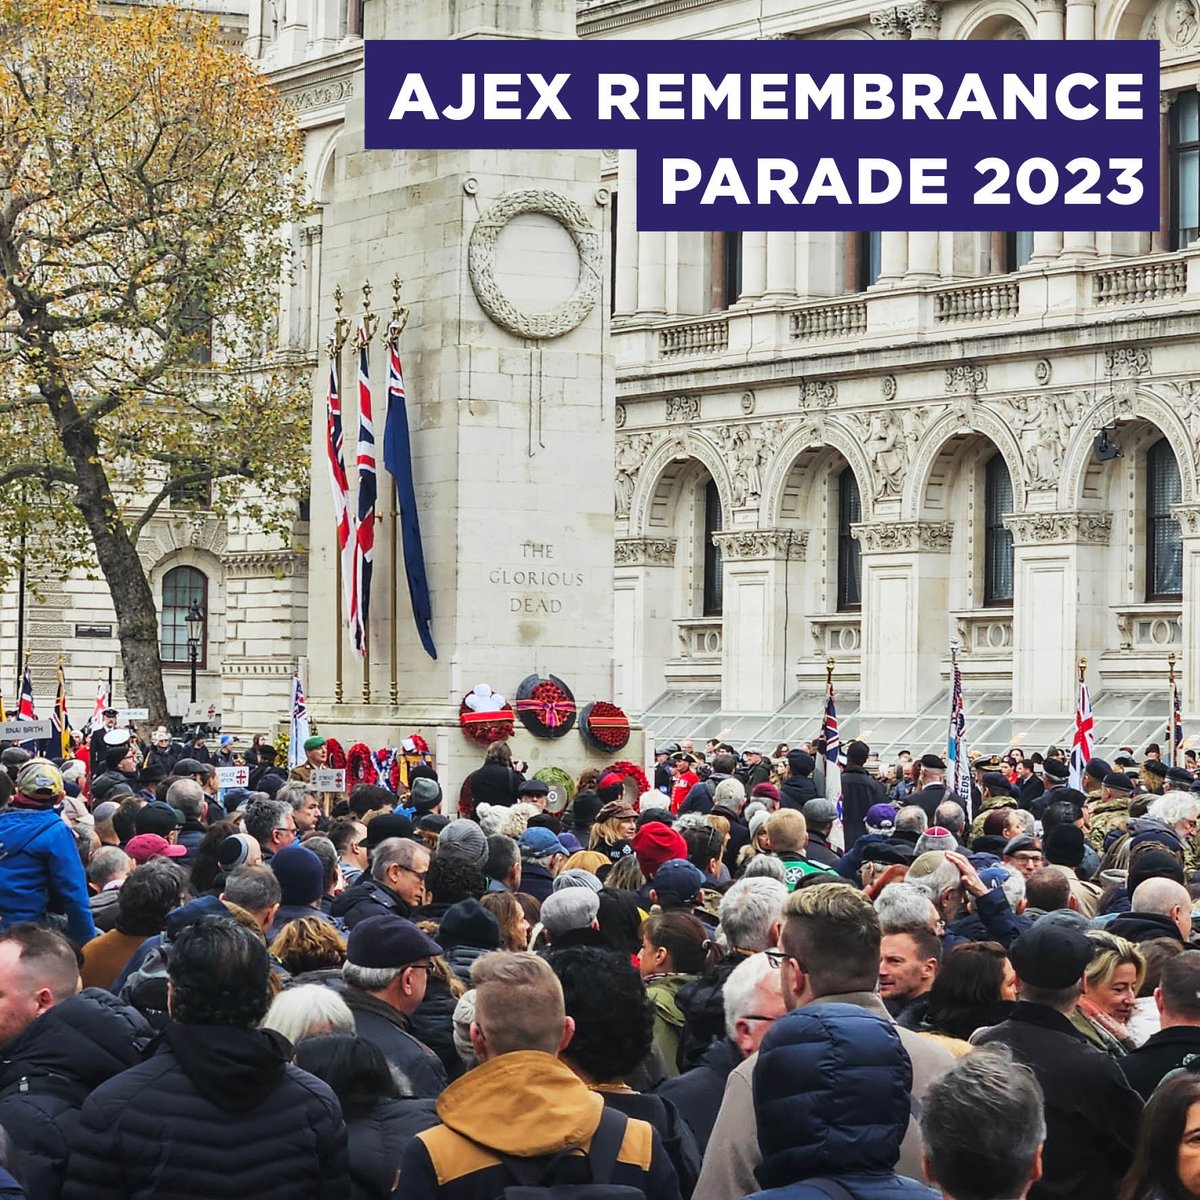 CST was privileged to secure the @AJEX_UK Remembrance Parade at the Cenotaph yesterday and be one of the many proud groups of marchers. We thank AJEX for all of their work.